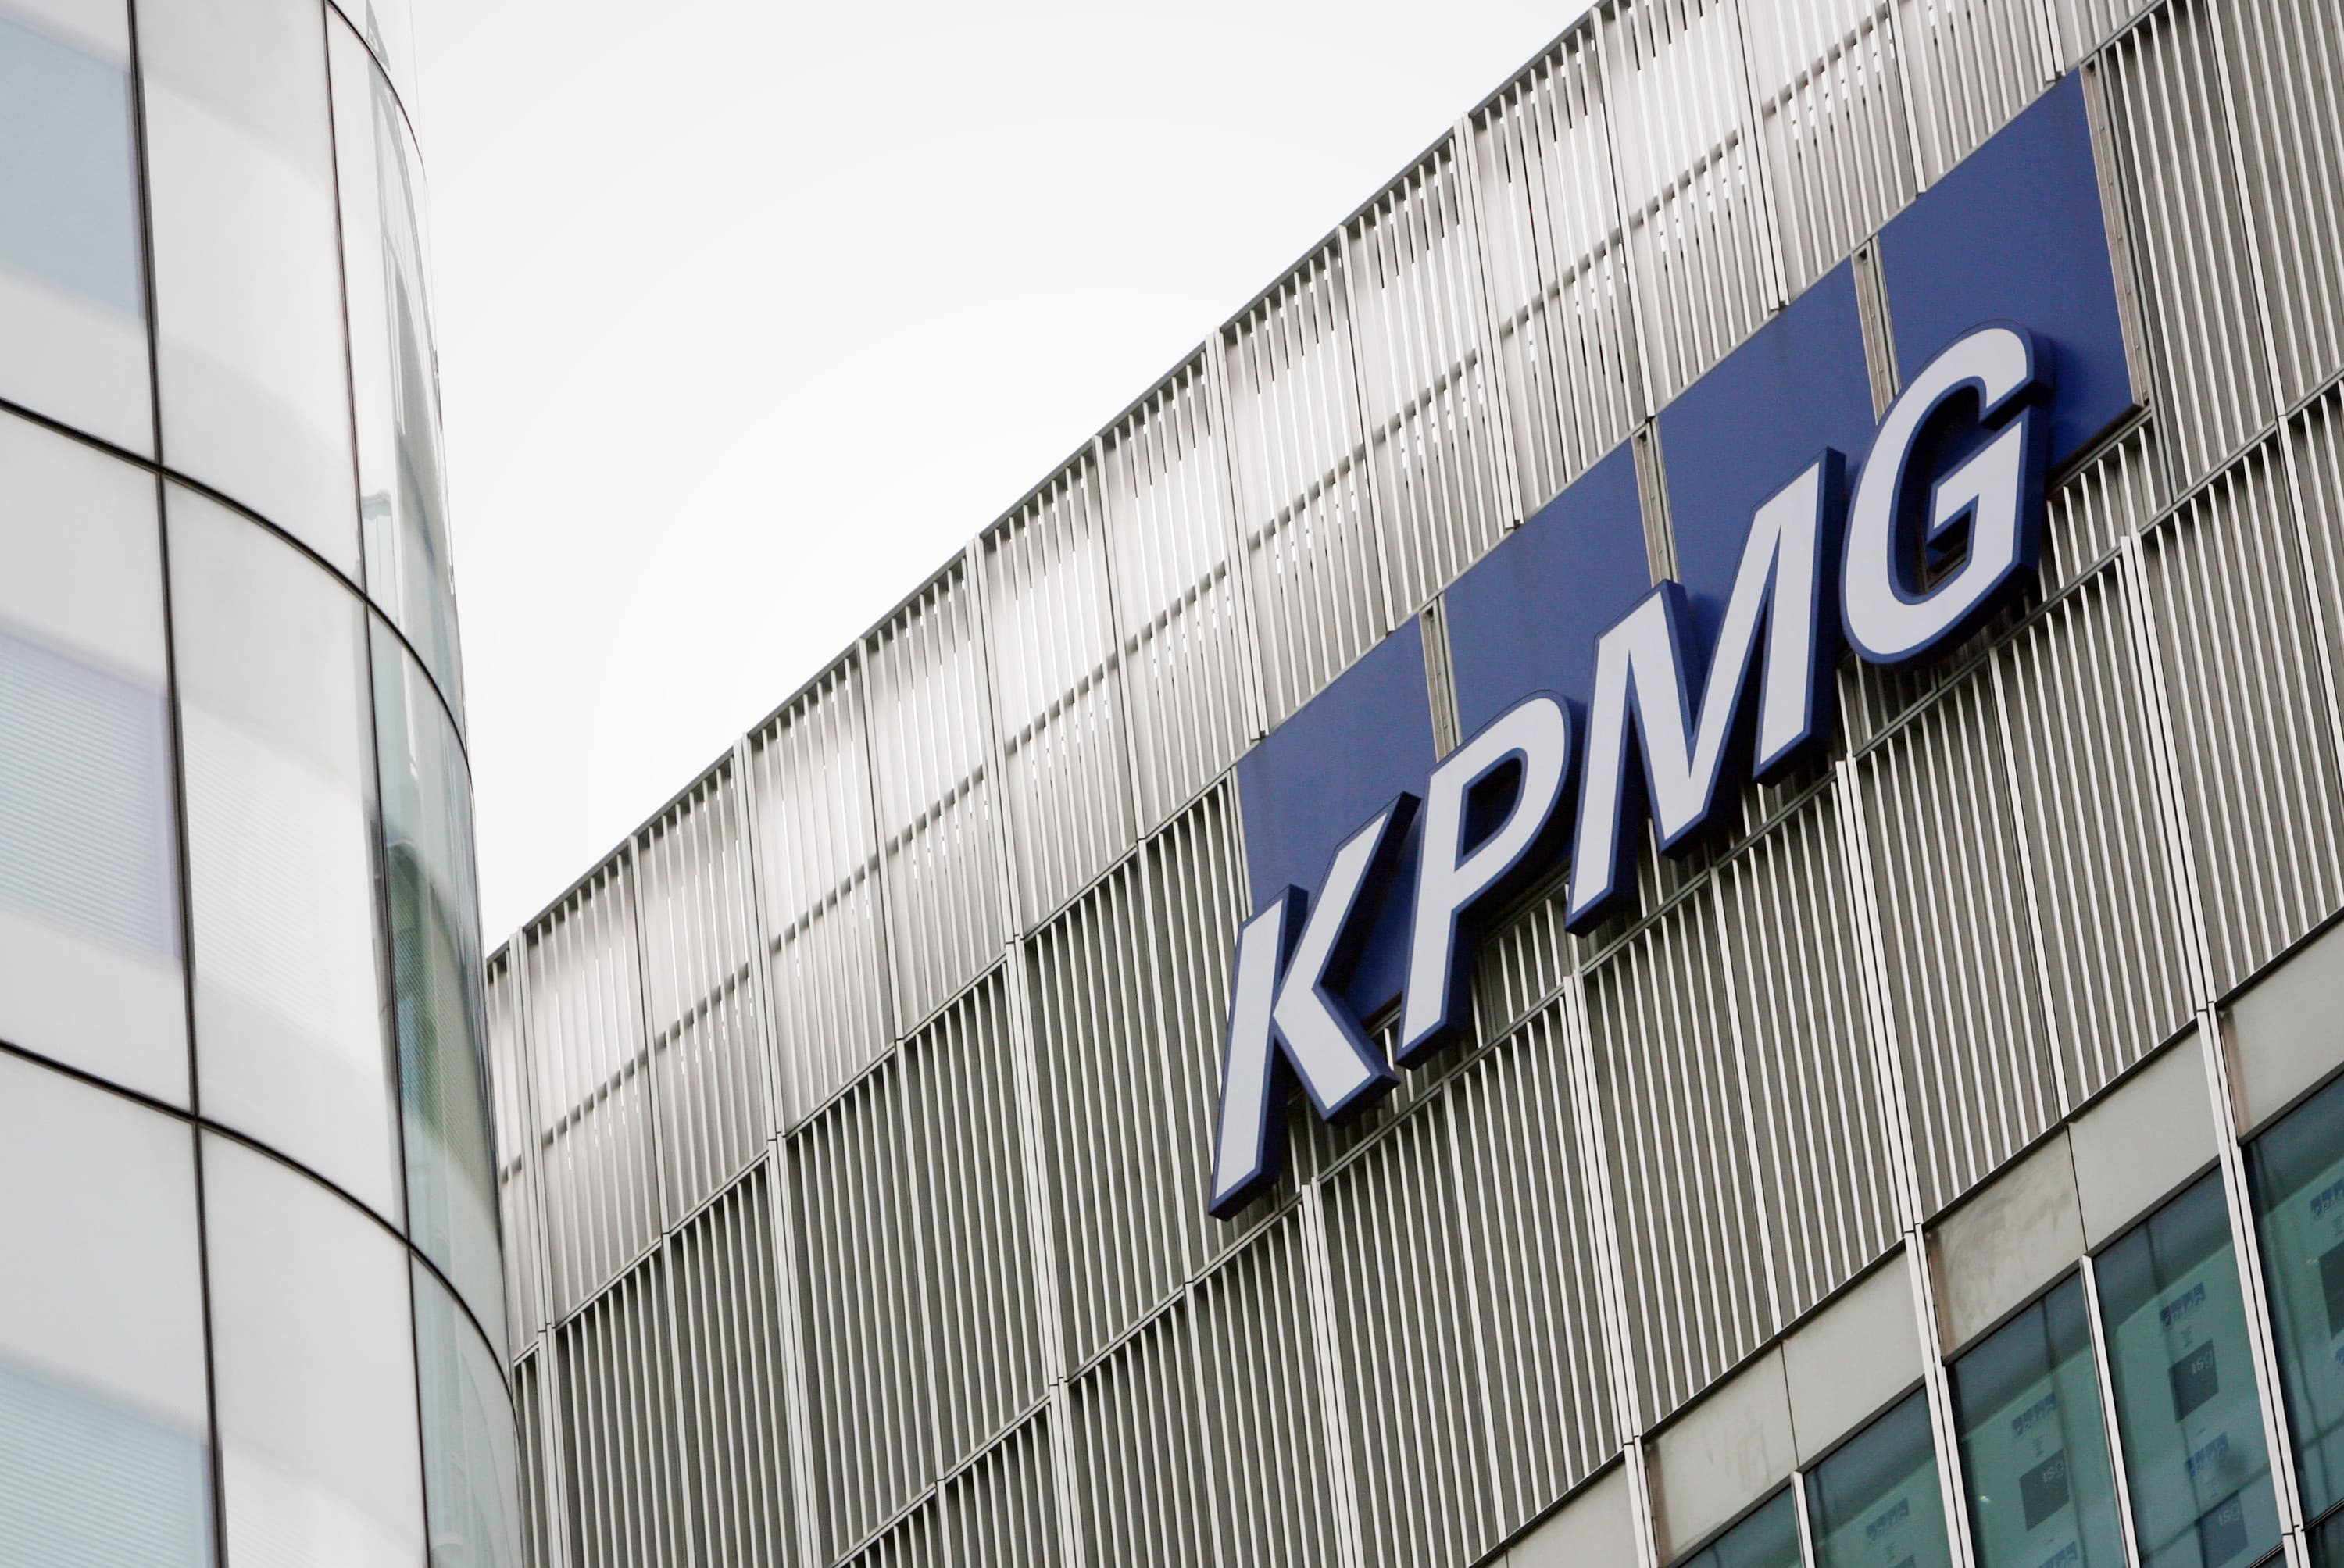 The KPMG chief resigns after telling the team to stop complaining about the pandemic